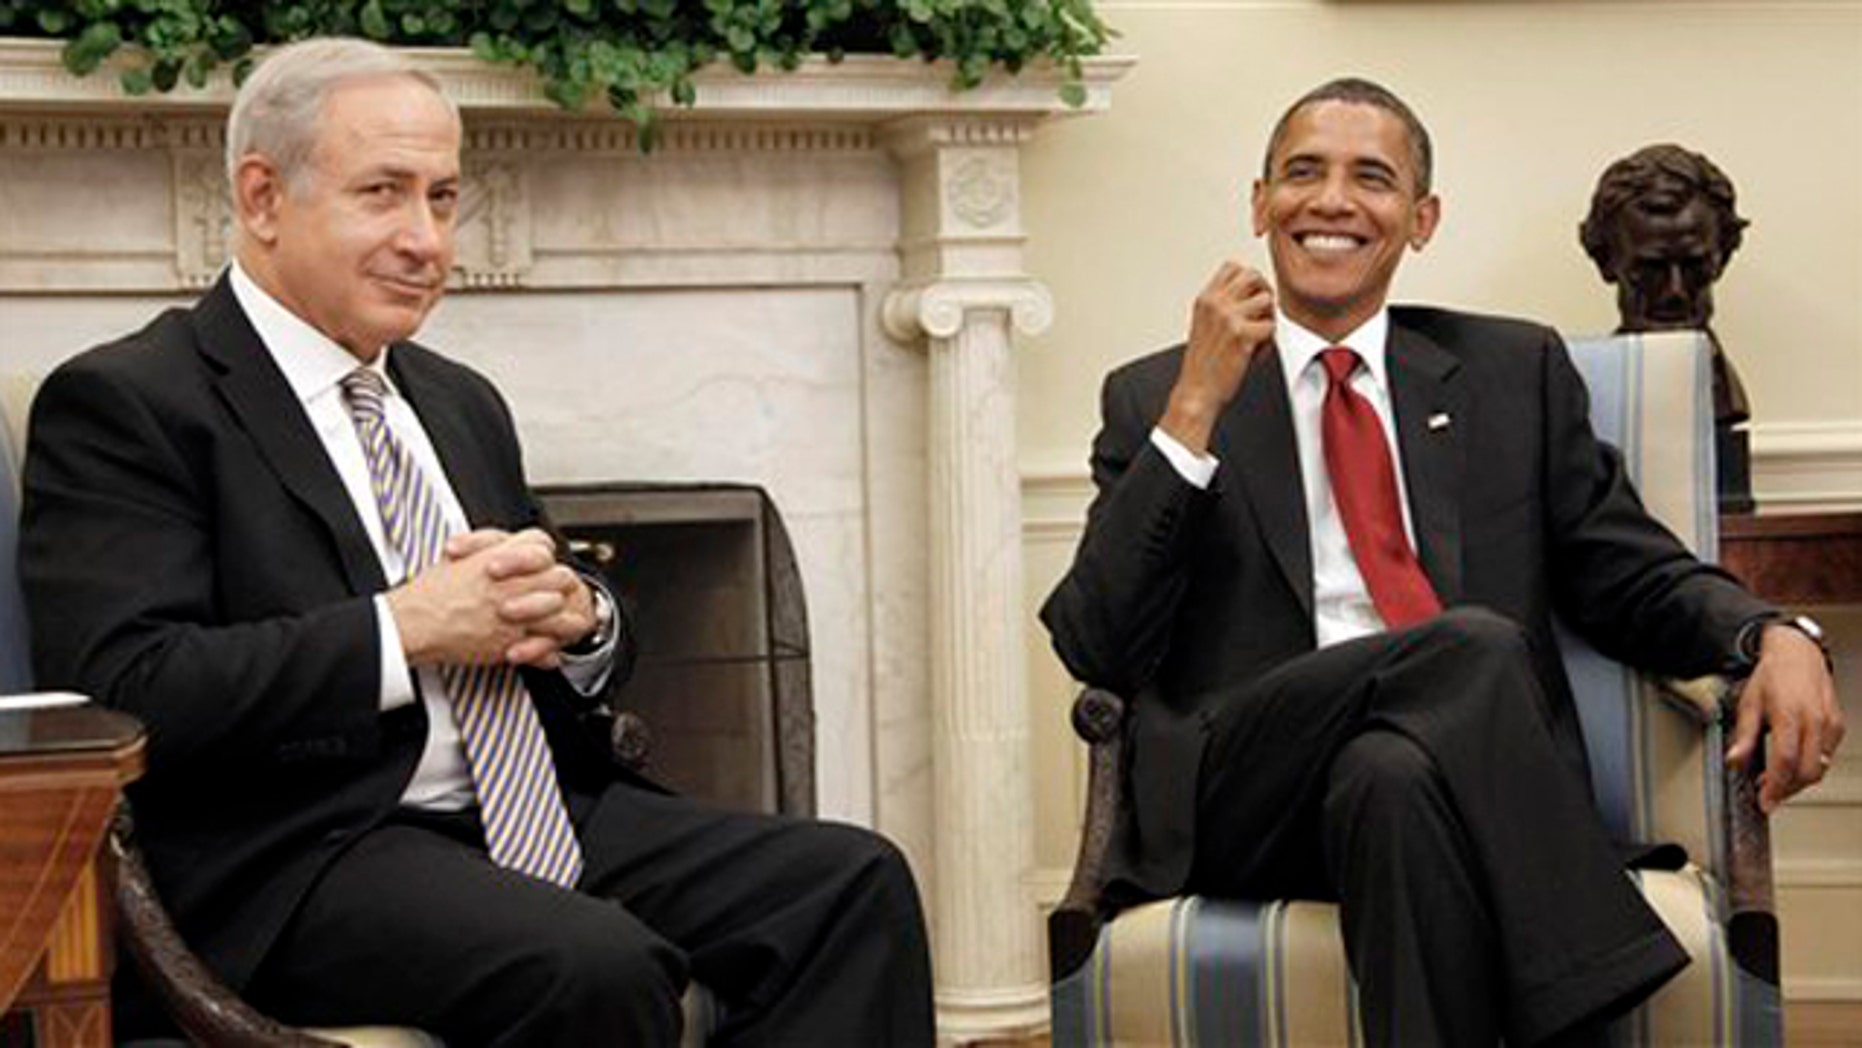 Bibi And Barack S Smiles Cannot Erase Challenges To U S Israel Relations Fox News